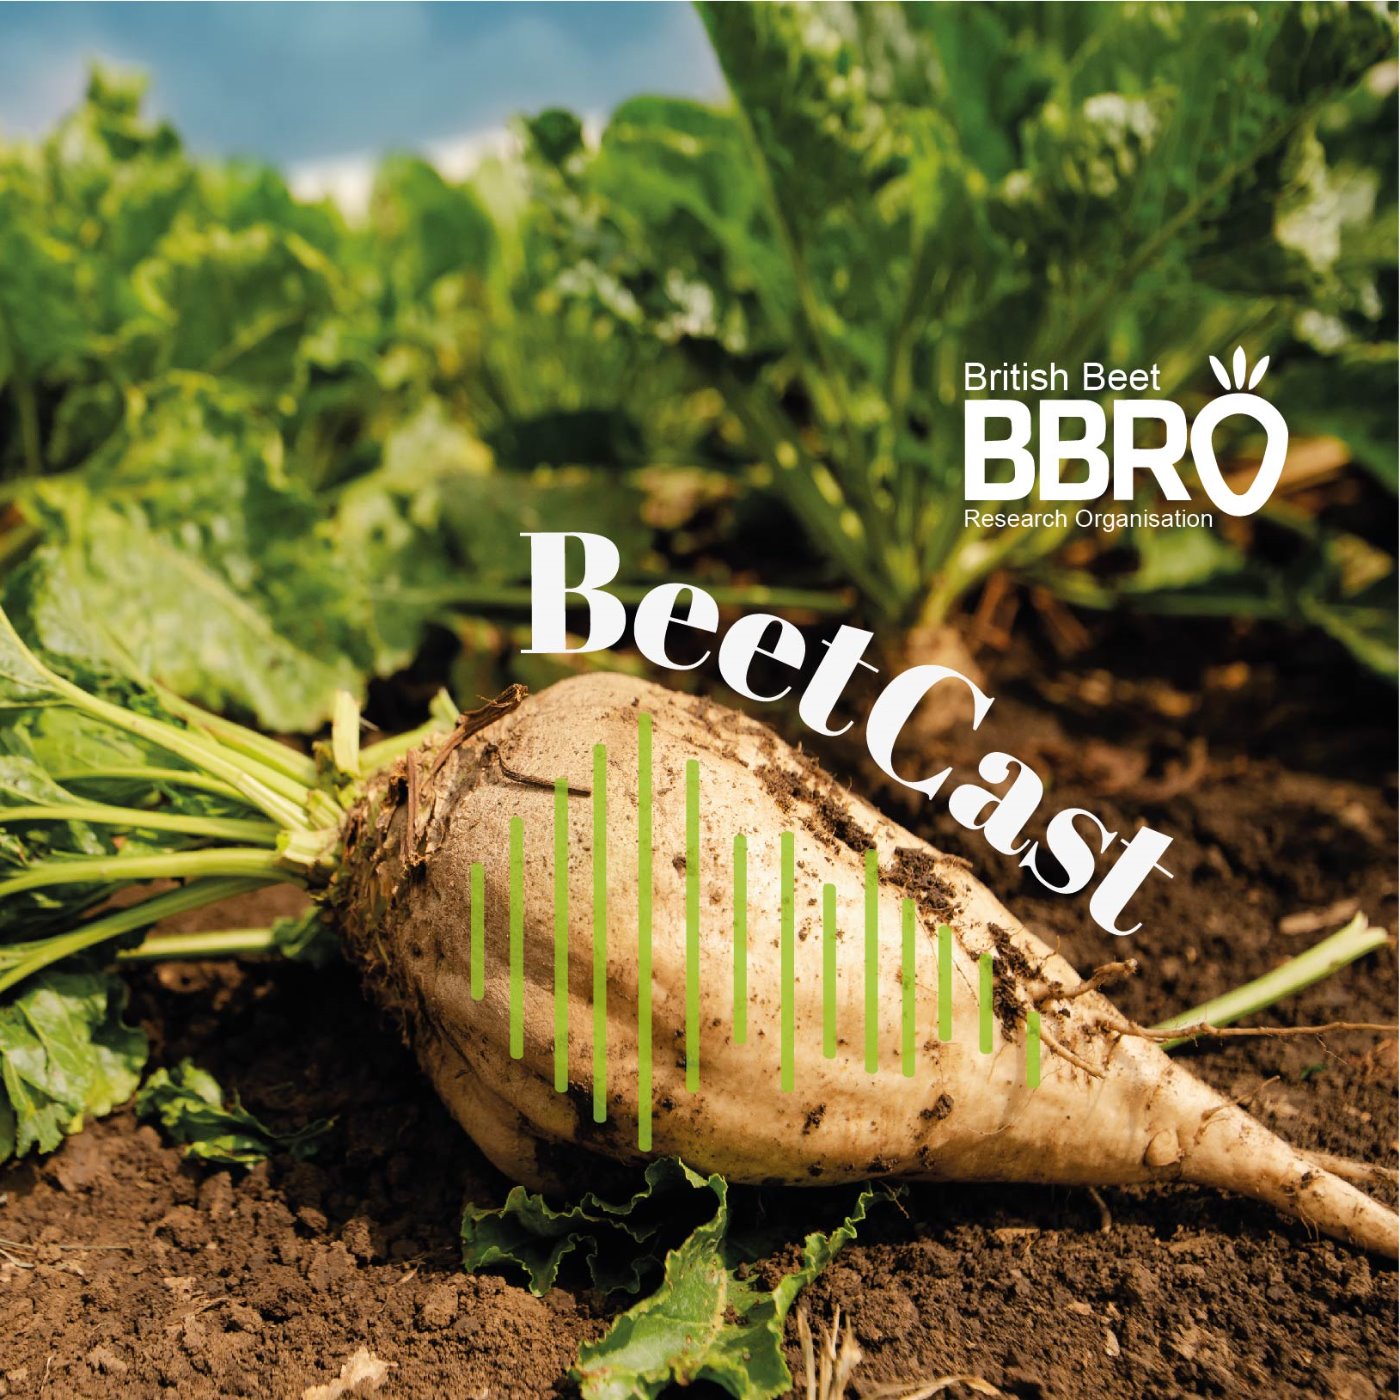 BeetCast (April) - 2022 RL sees first virus tolerant variety released.